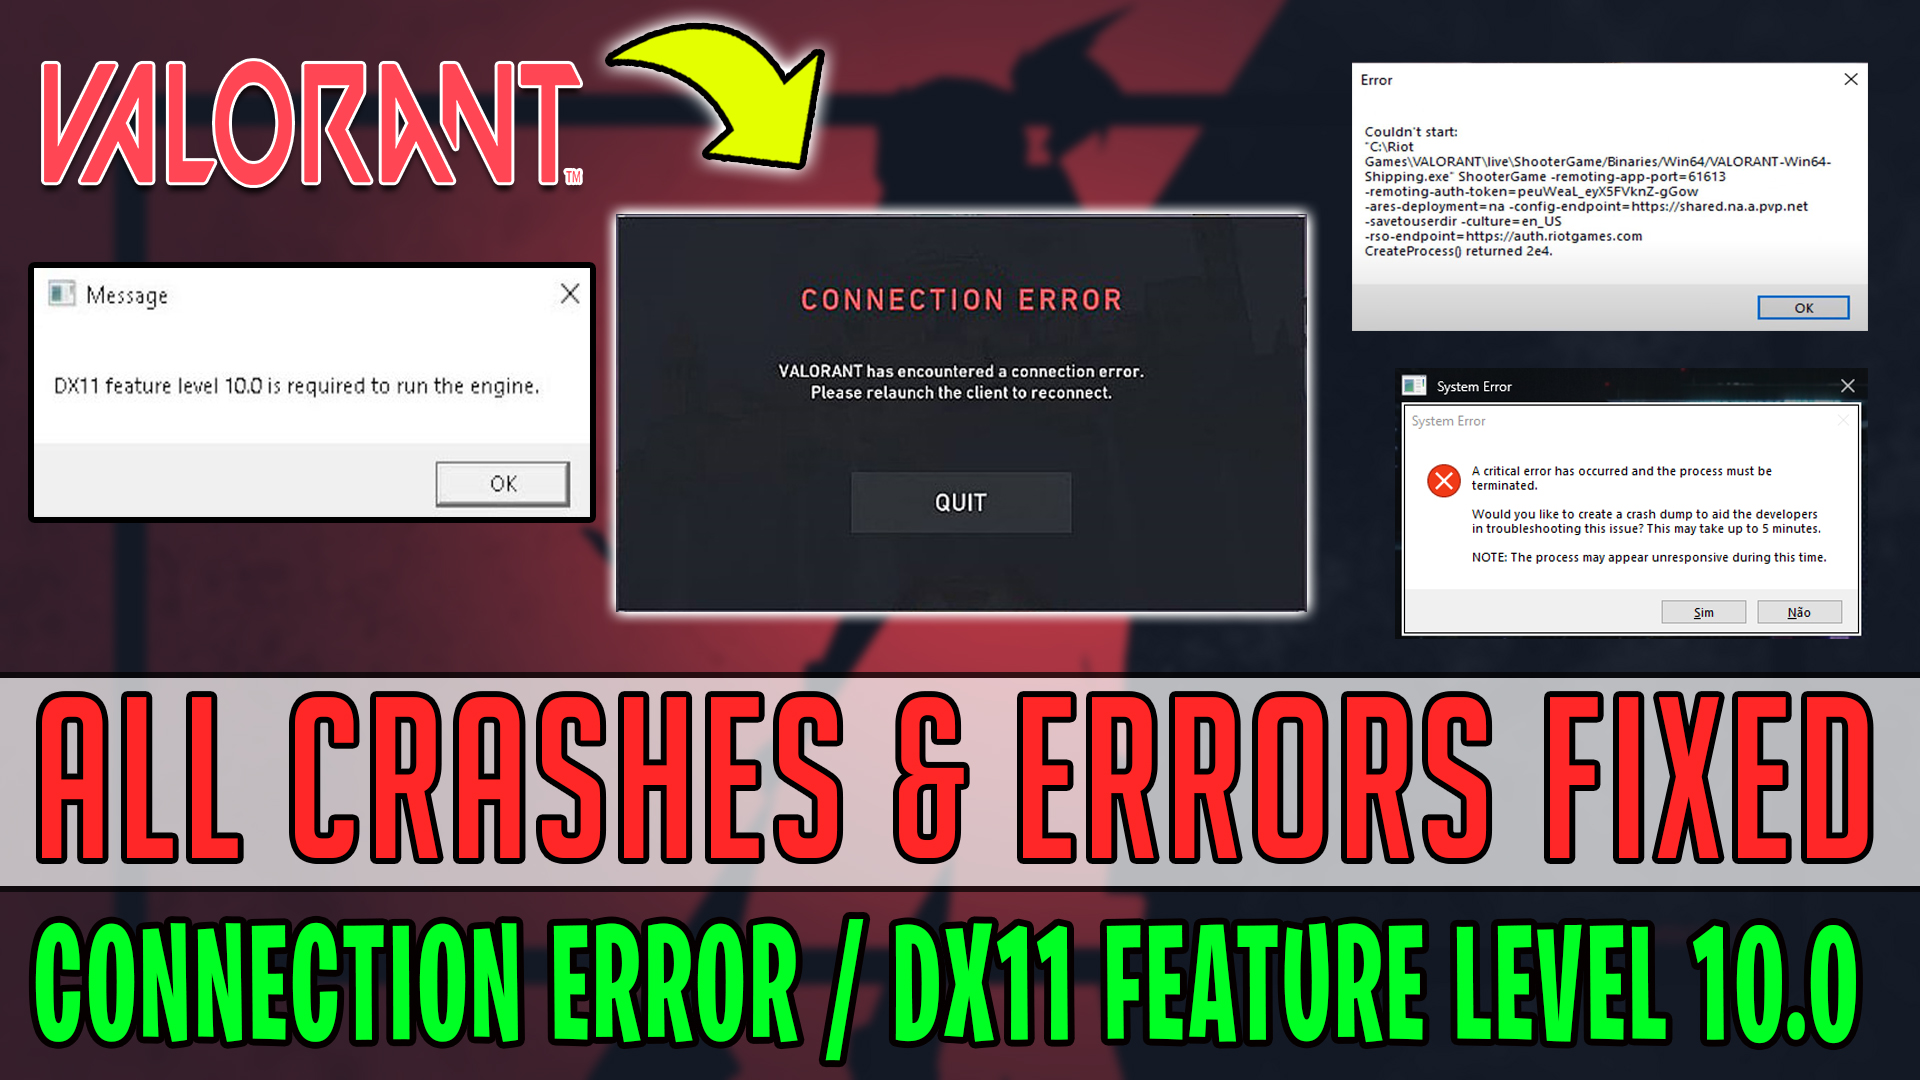 Dx11 feature 10.0 is required to Run the engine. Валорант dx11 feature Level 10.0 is required to Run the engine. DX 11 feature Level 10.0 is required Run the engine решение. Critical Error has occurred valorant. Error connection terminated